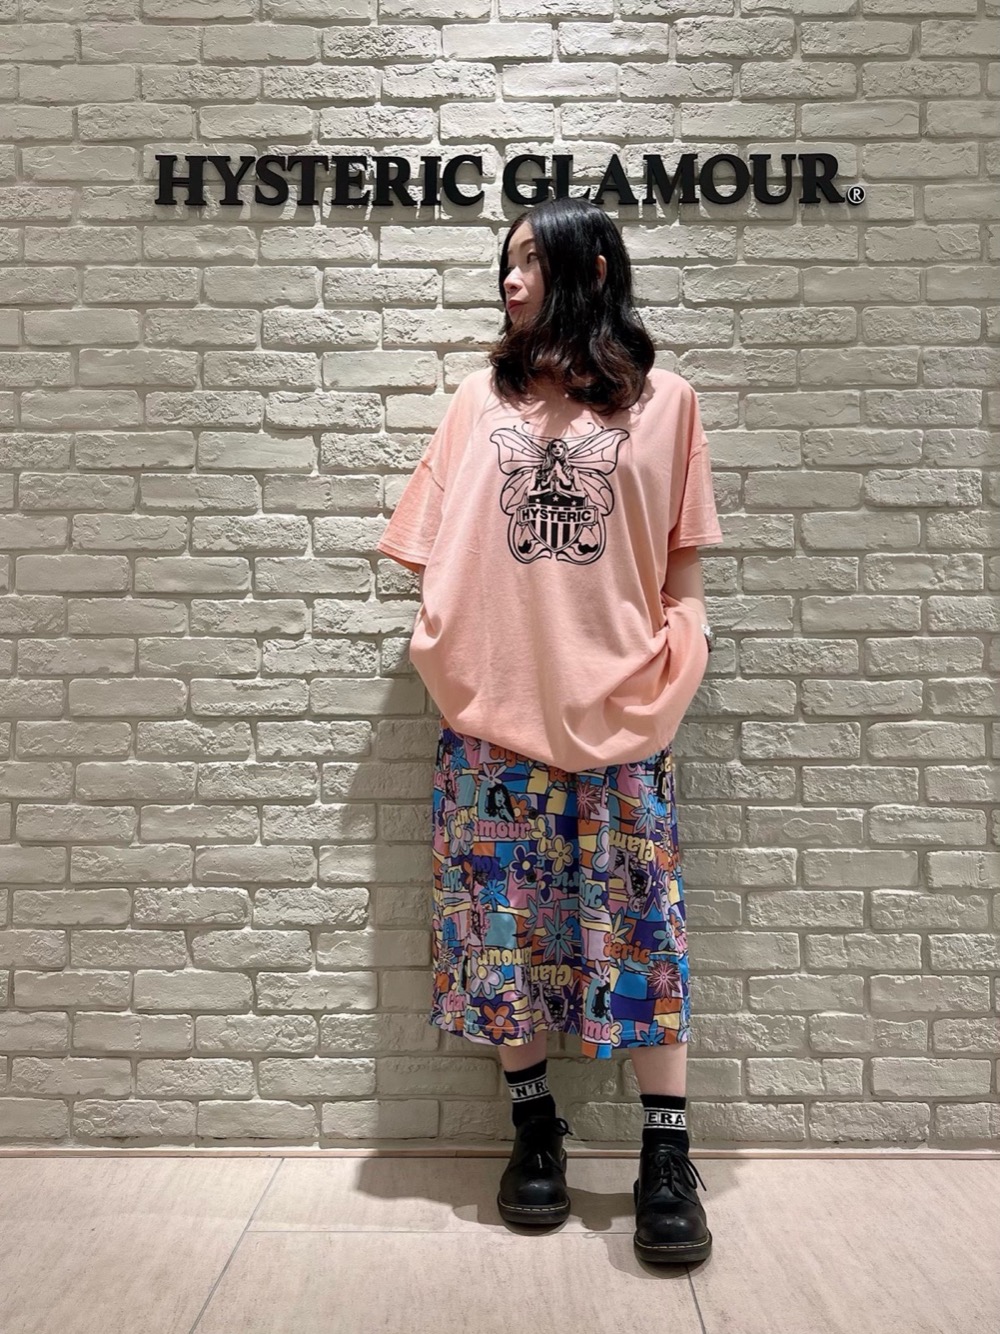 HYSTERIC GLAMOUR名古屋店